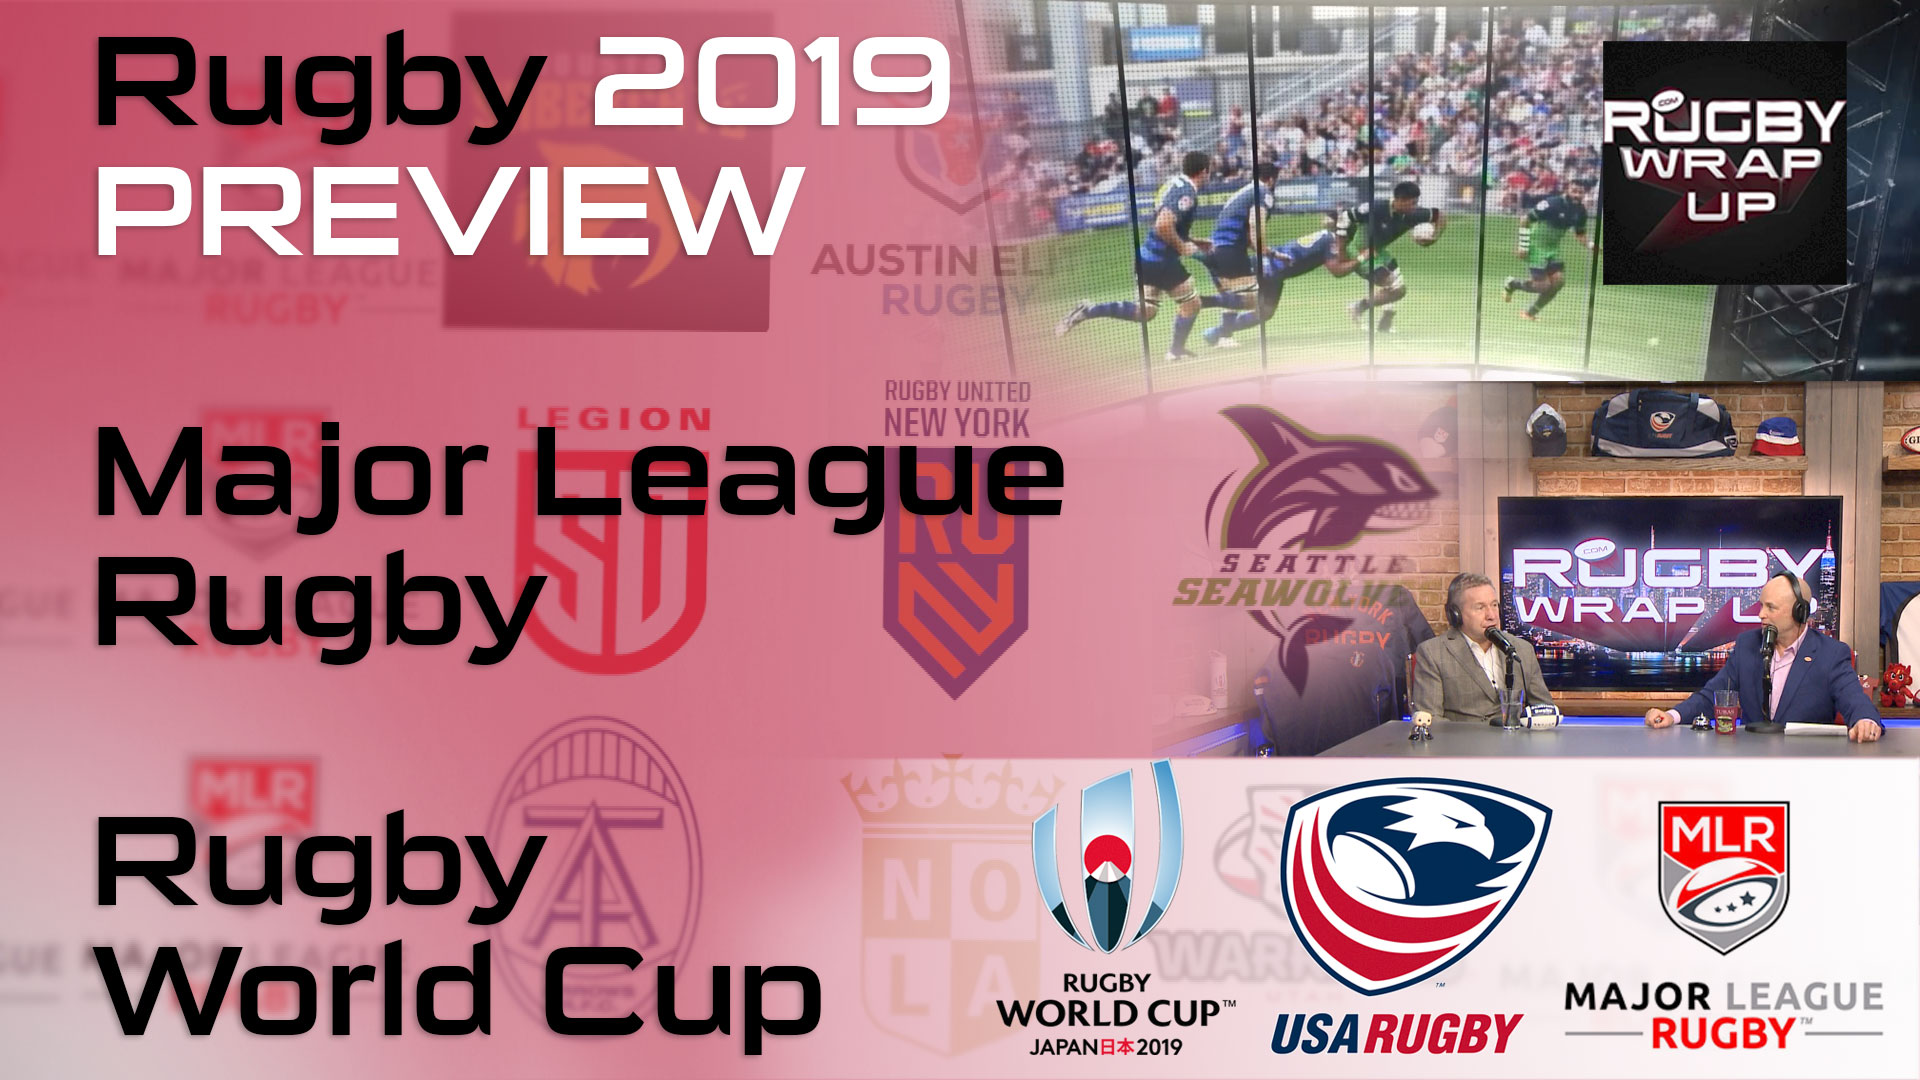 Global Preview & Major League Rugby II; Pros & Cons w/ Matt McCarthy, Steve Lewis | RUGBY WRAP UP